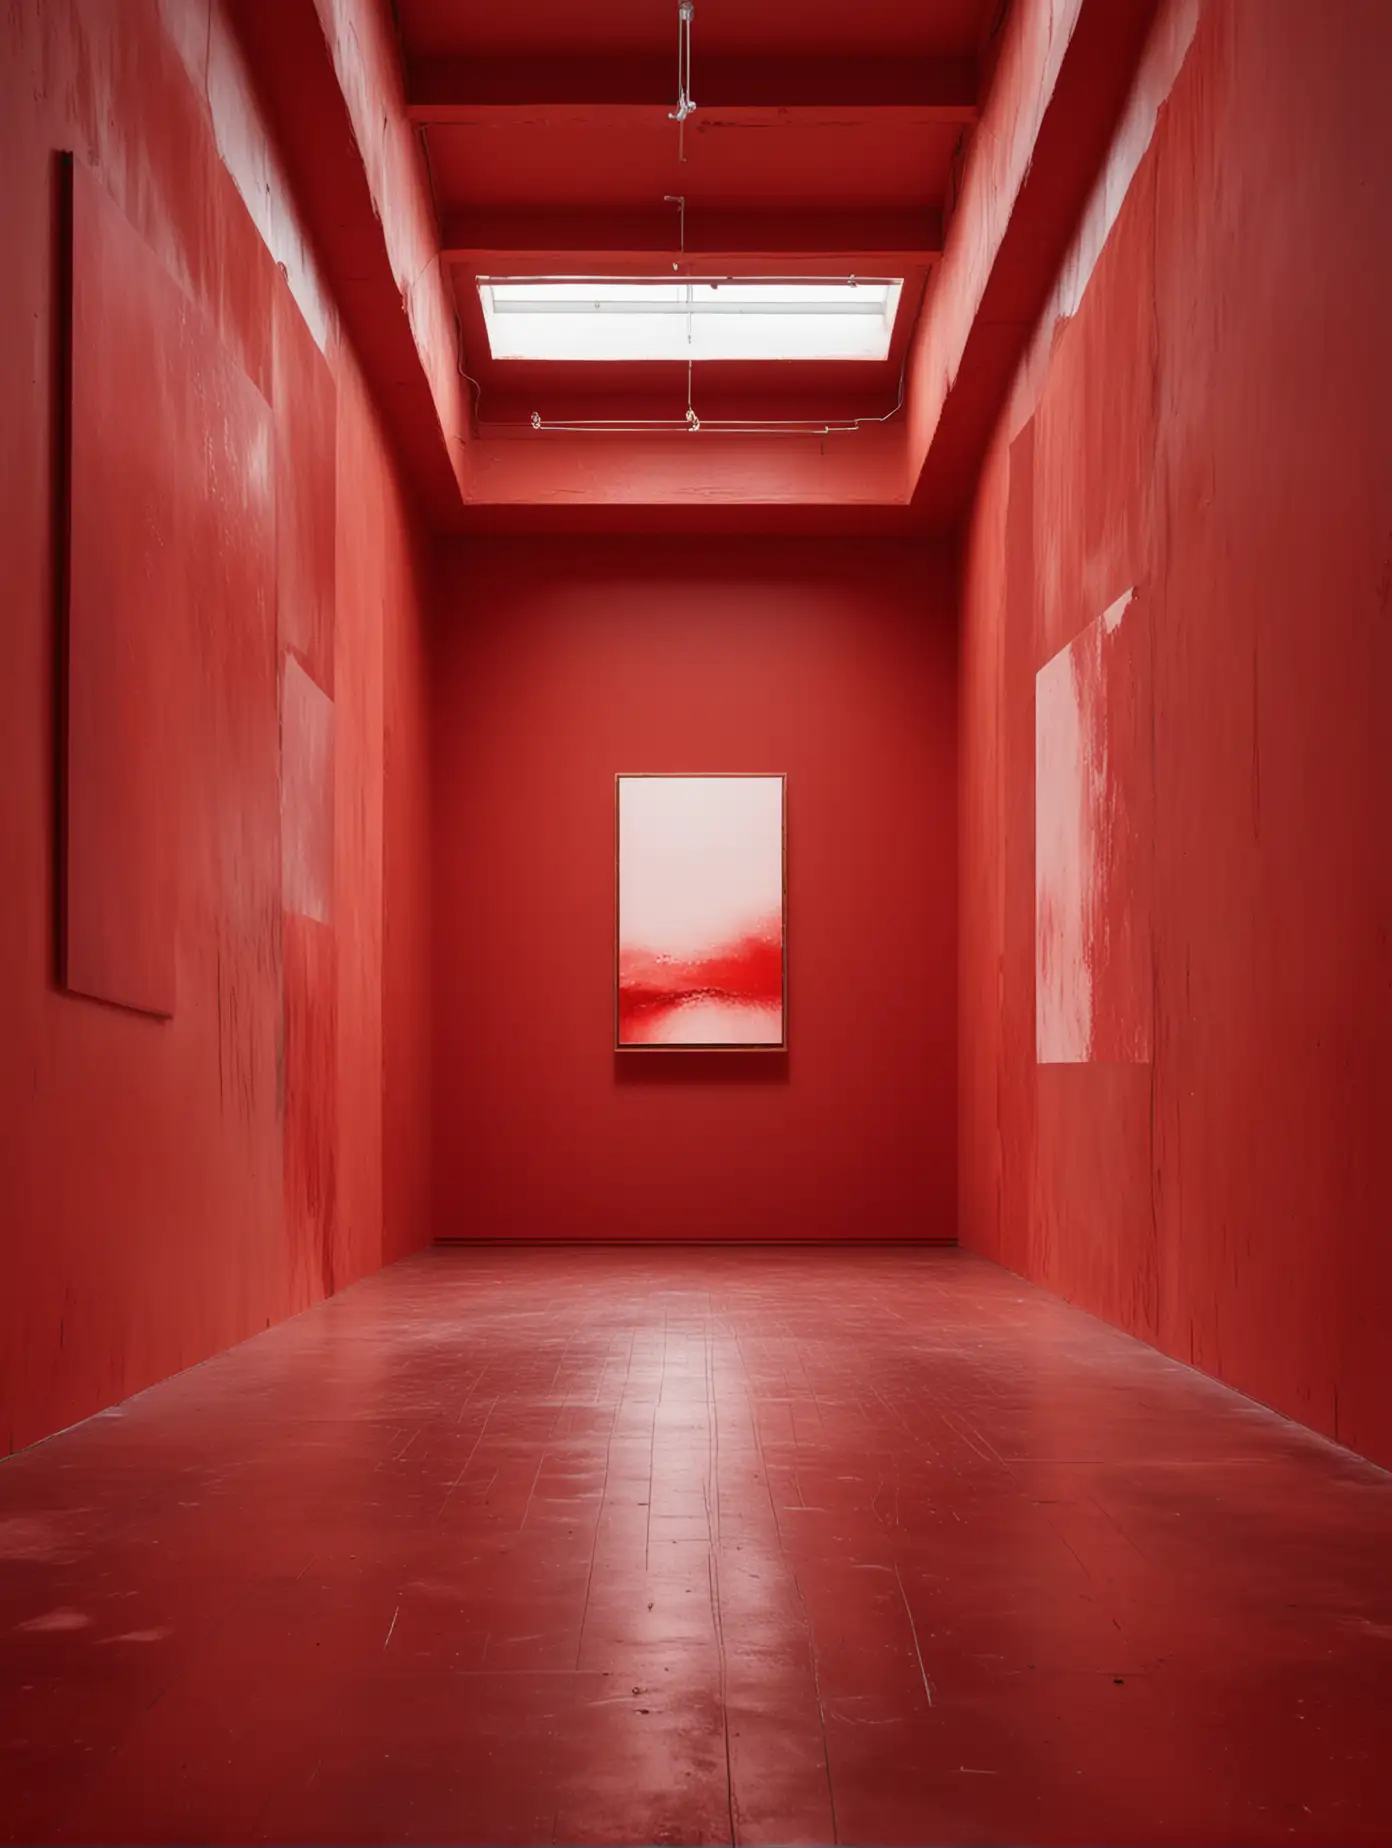 abstract red art in large red gallery space phot studio, cinematic day light